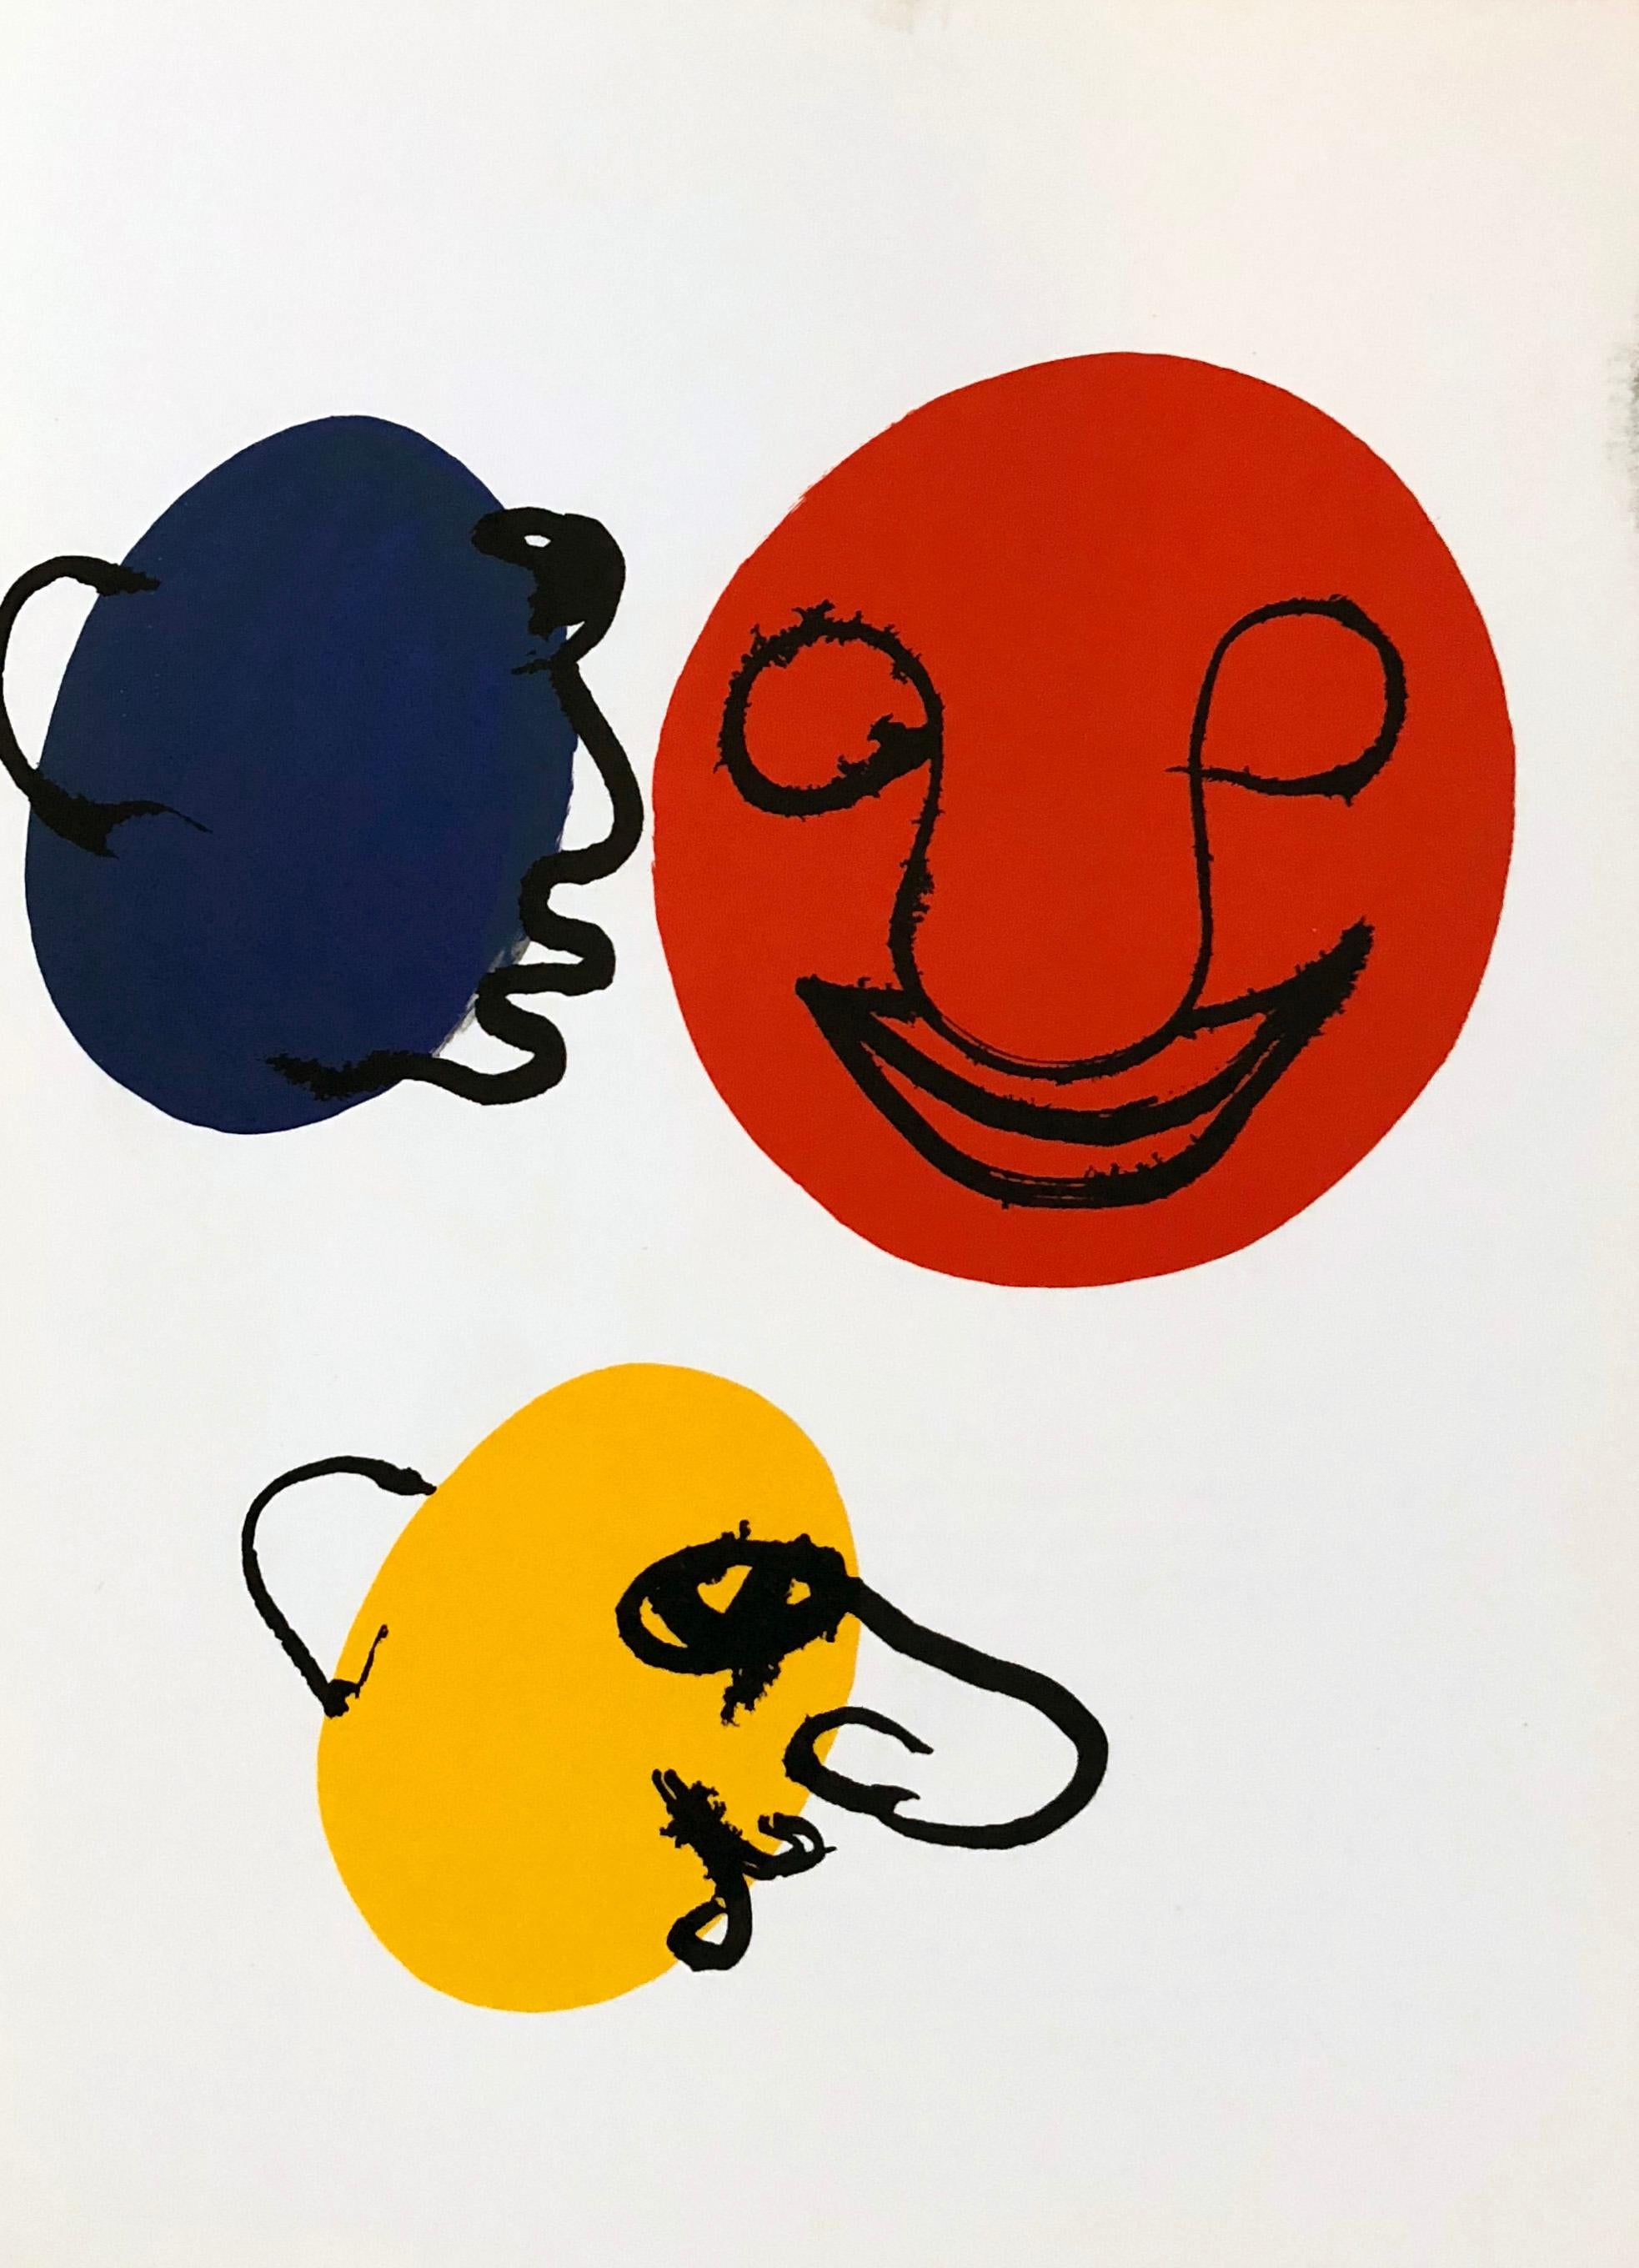 Vintage early 1970s Alexander Calder Lithograph:
Portfolio: Derriere Le Miroir.
Published by: Galerie Maeght, Paris, 1971.

Lithograph in colors; 11 x 15 inches
Some minor edge wear on upper and printer’s marking on top right; otherwise very good